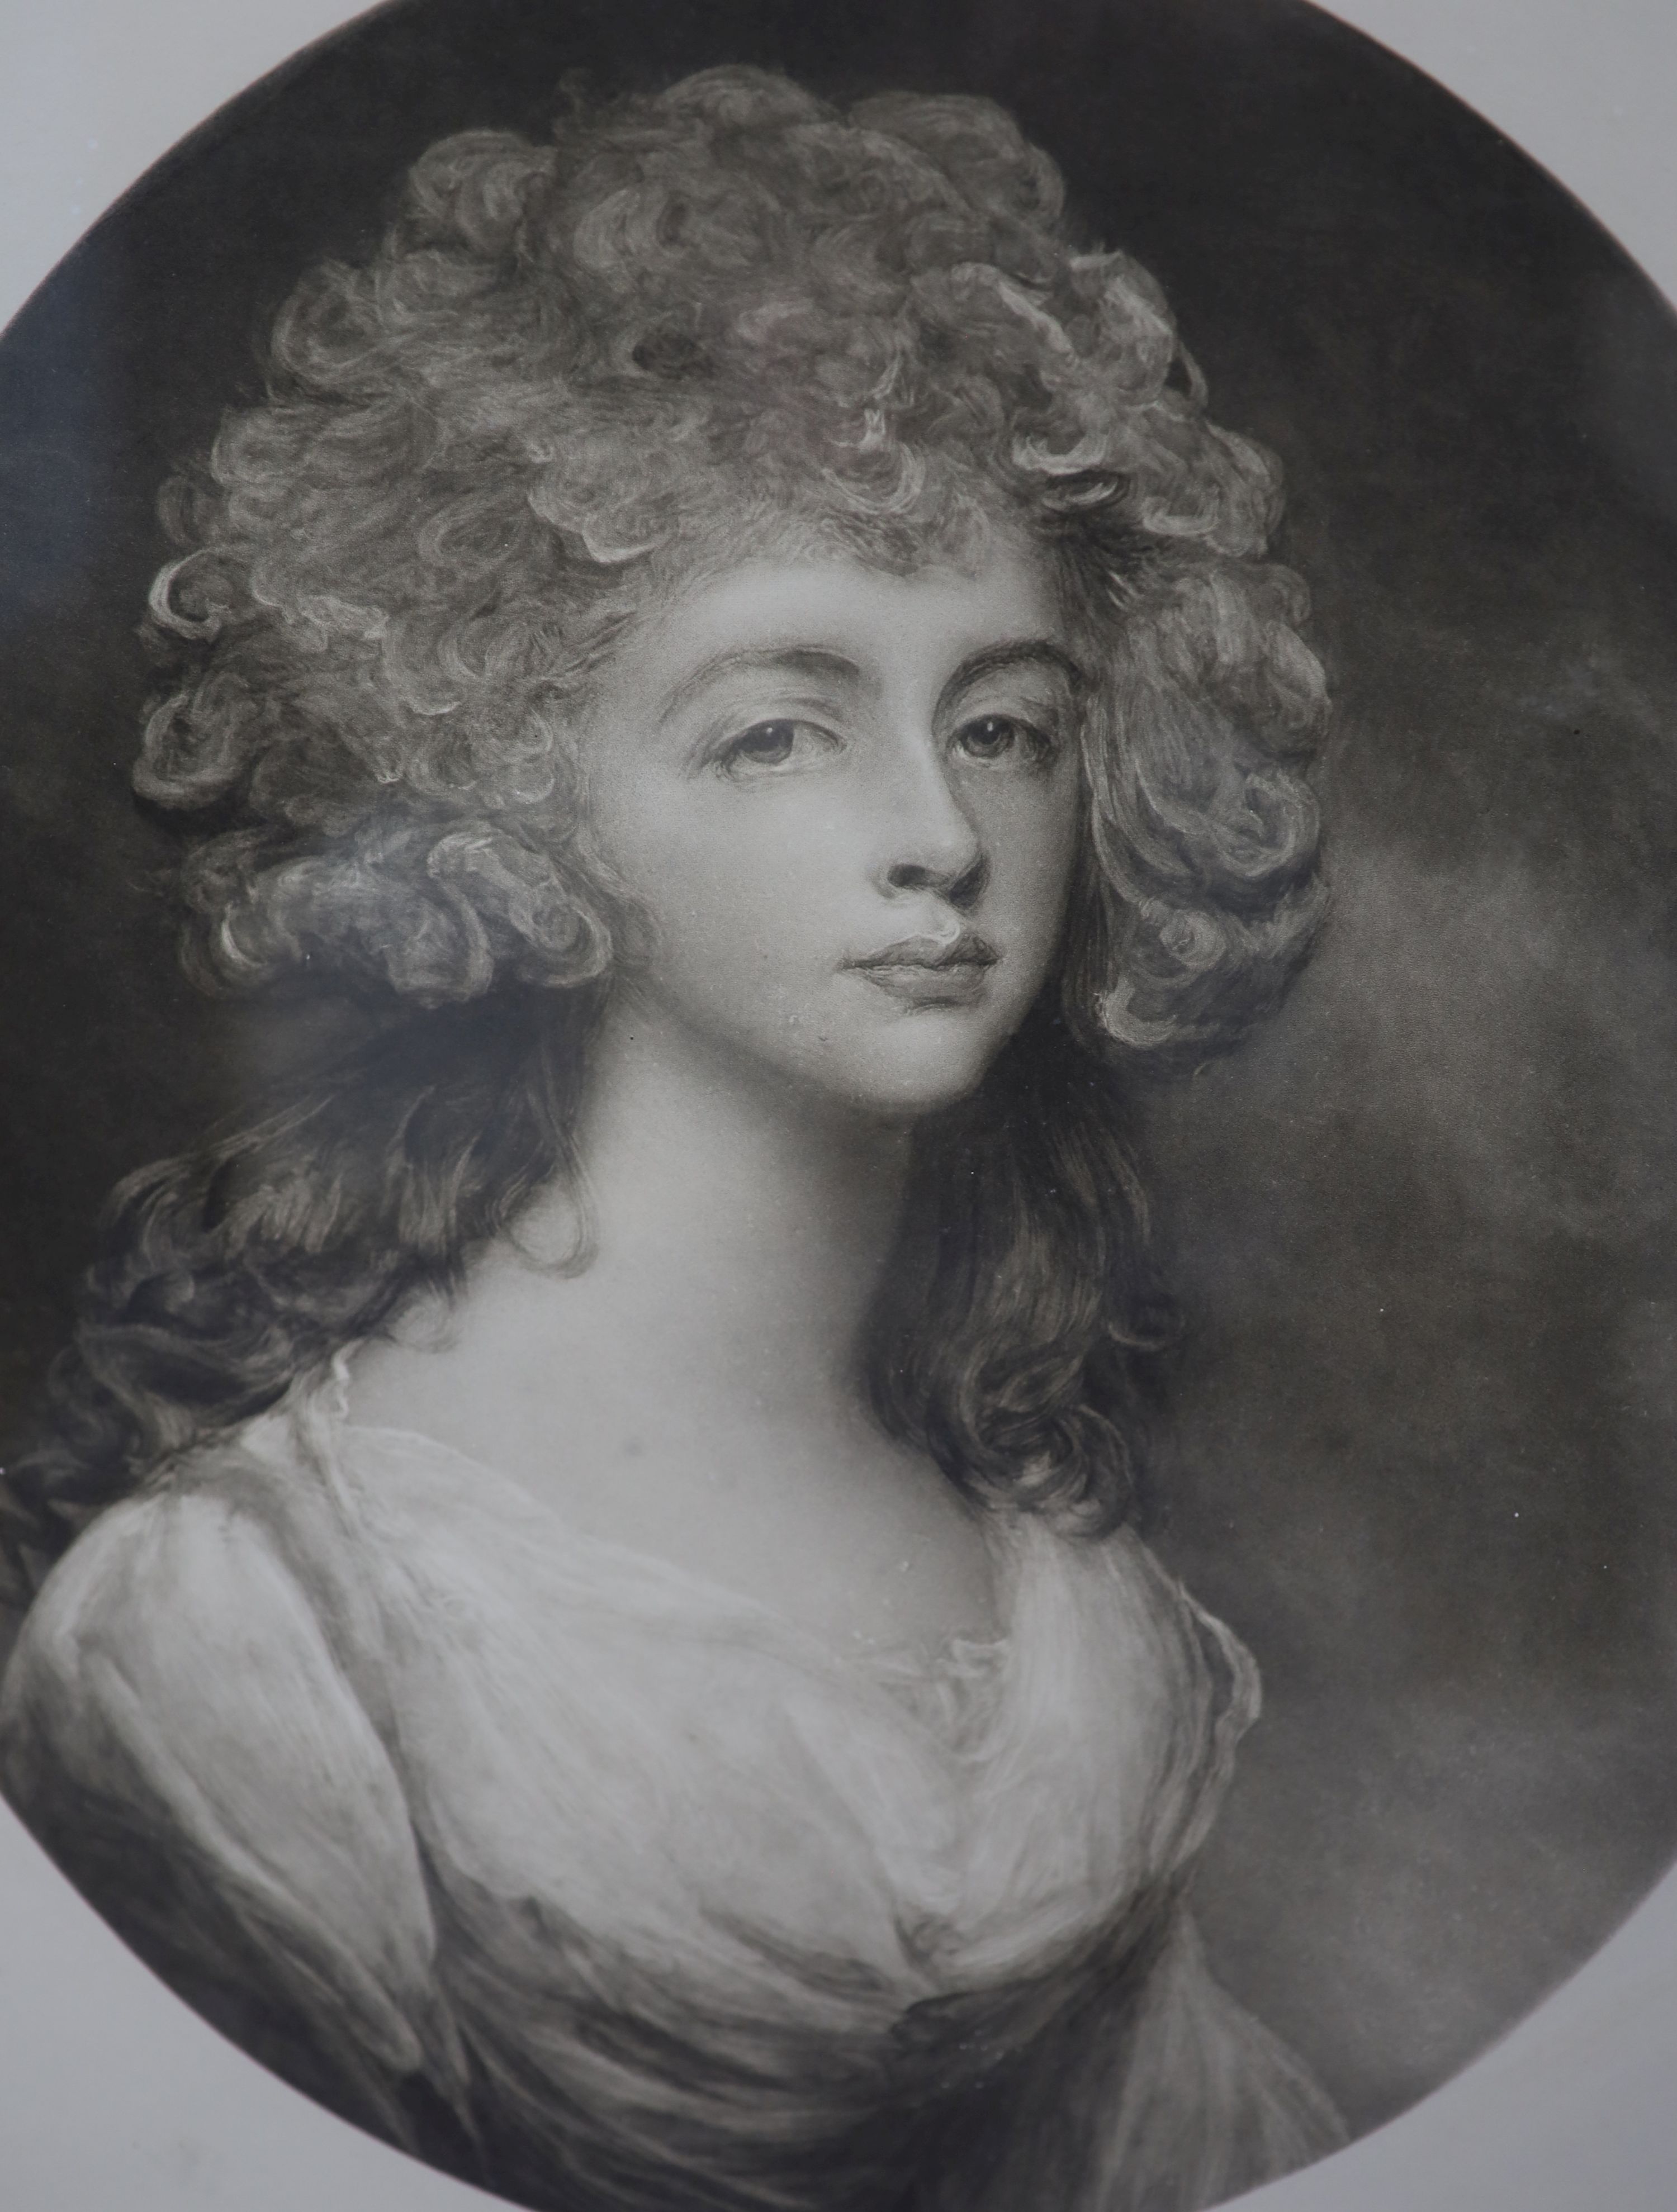 Gerald Robinson, after George Romney Louisa Catherine, Wife of 1st Marquess of Sligo, published 1896, 59.75 x 49.5cm,